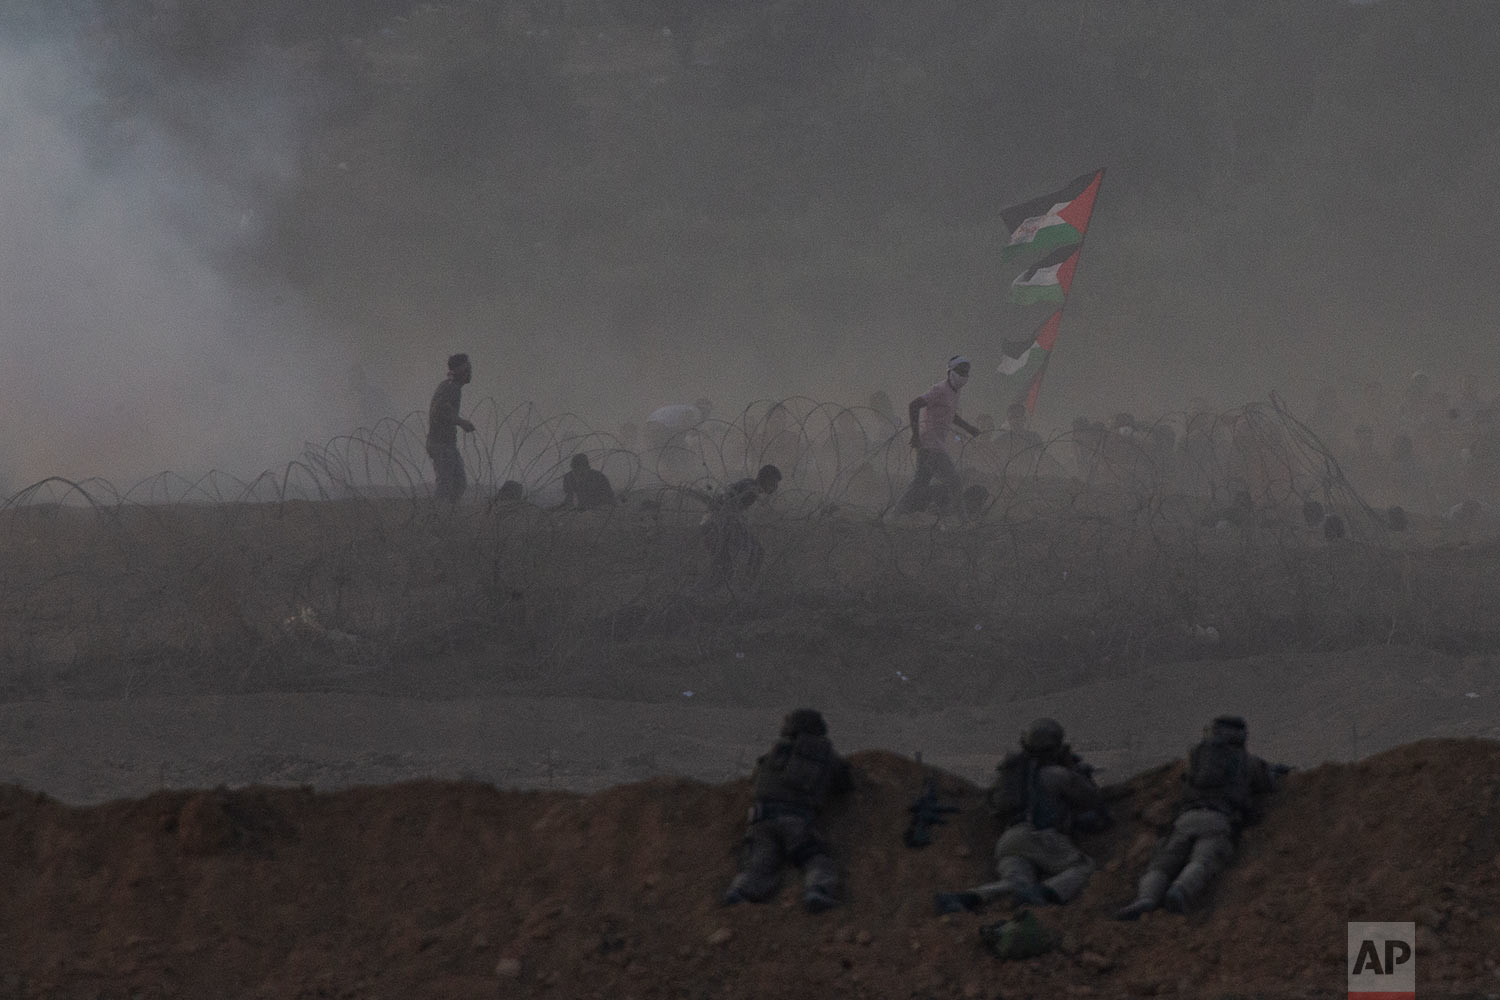  Israeli soldiers are positioned on a sand berm as Palestinian protesters run during a protest along the Israel Gaza border in Israel, Friday, Oct. 19, 2018. (AP Photo/Ariel Schalit) 